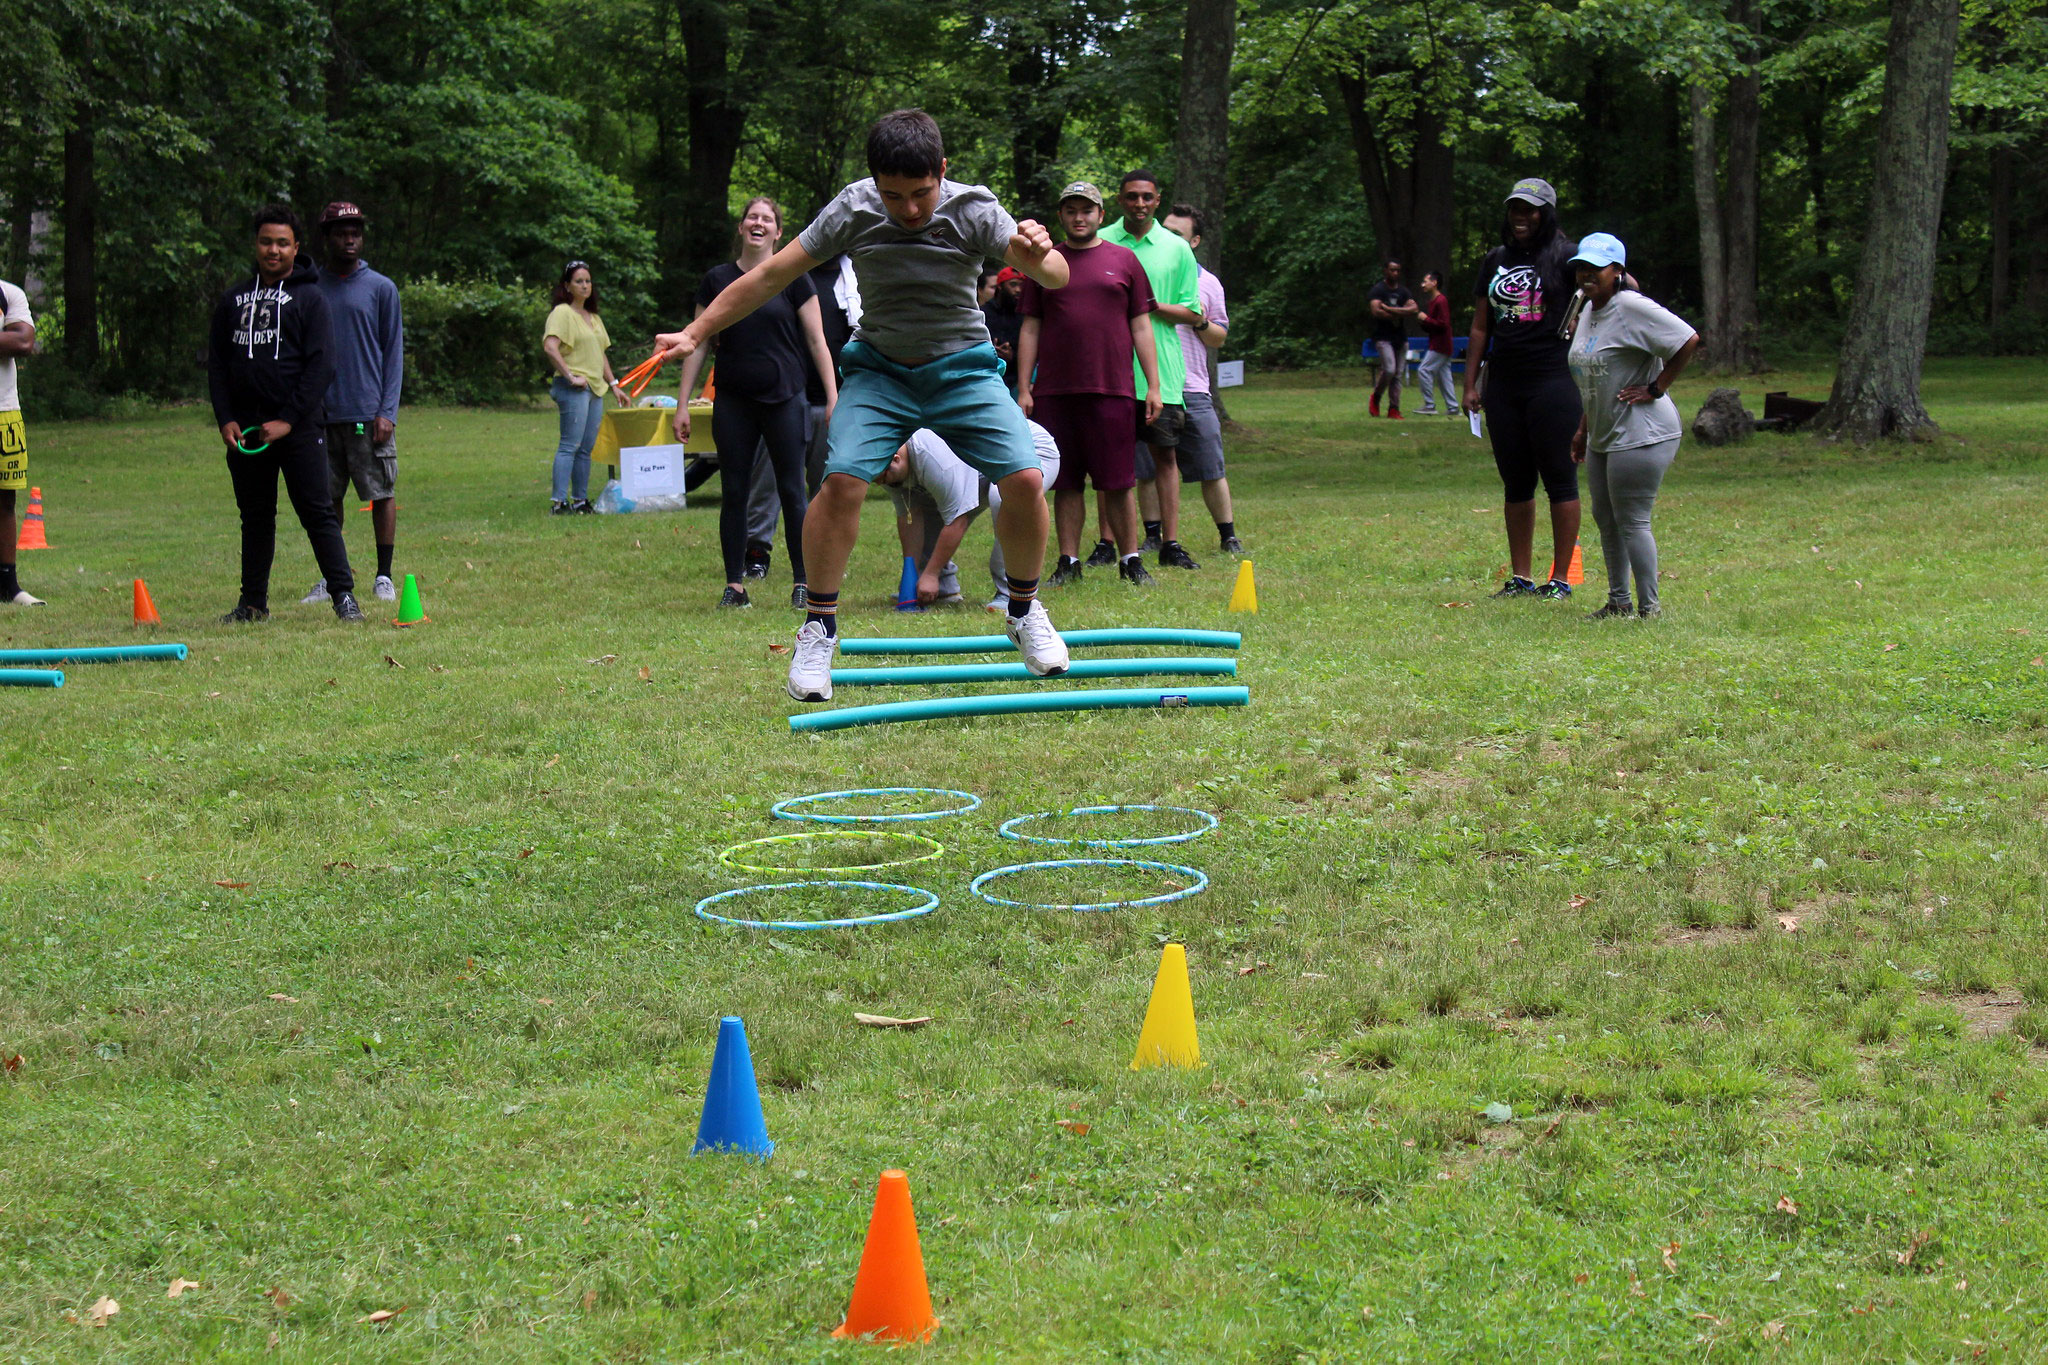 A young man jumps high in the air as he navigates an obstacle course while his friends look on.